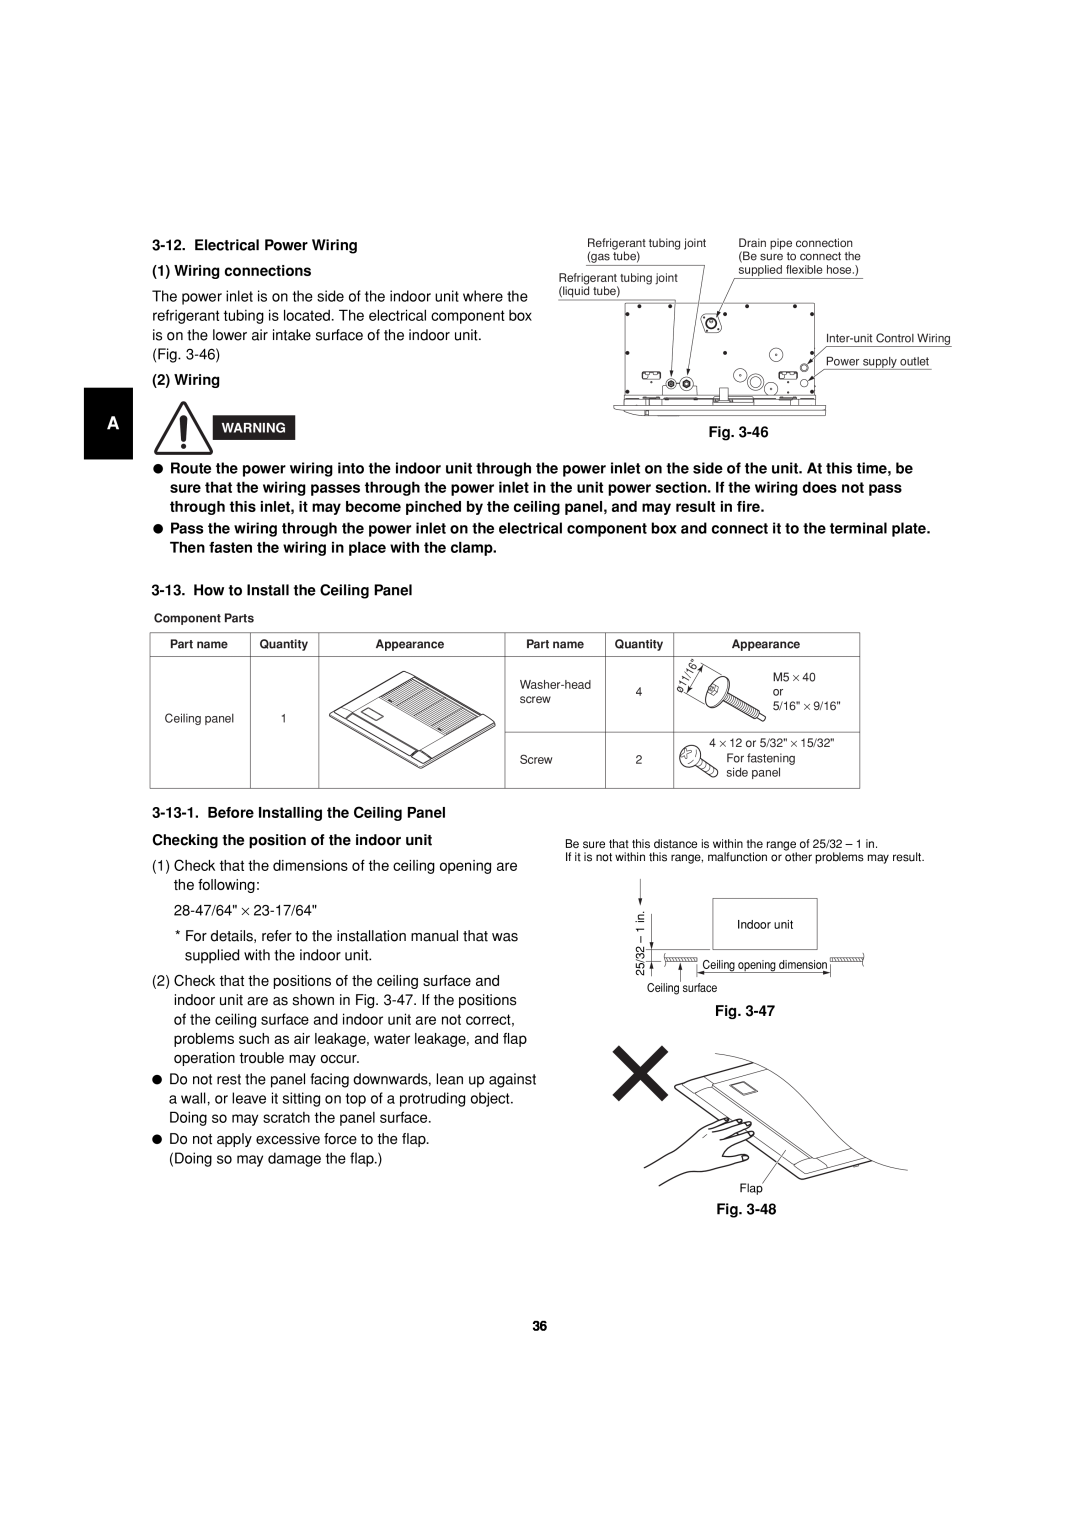 Sanyo 85464359981002 Electrical Power Wiring, Wiring connections, How to Install the Ceiling Panel, Fig 